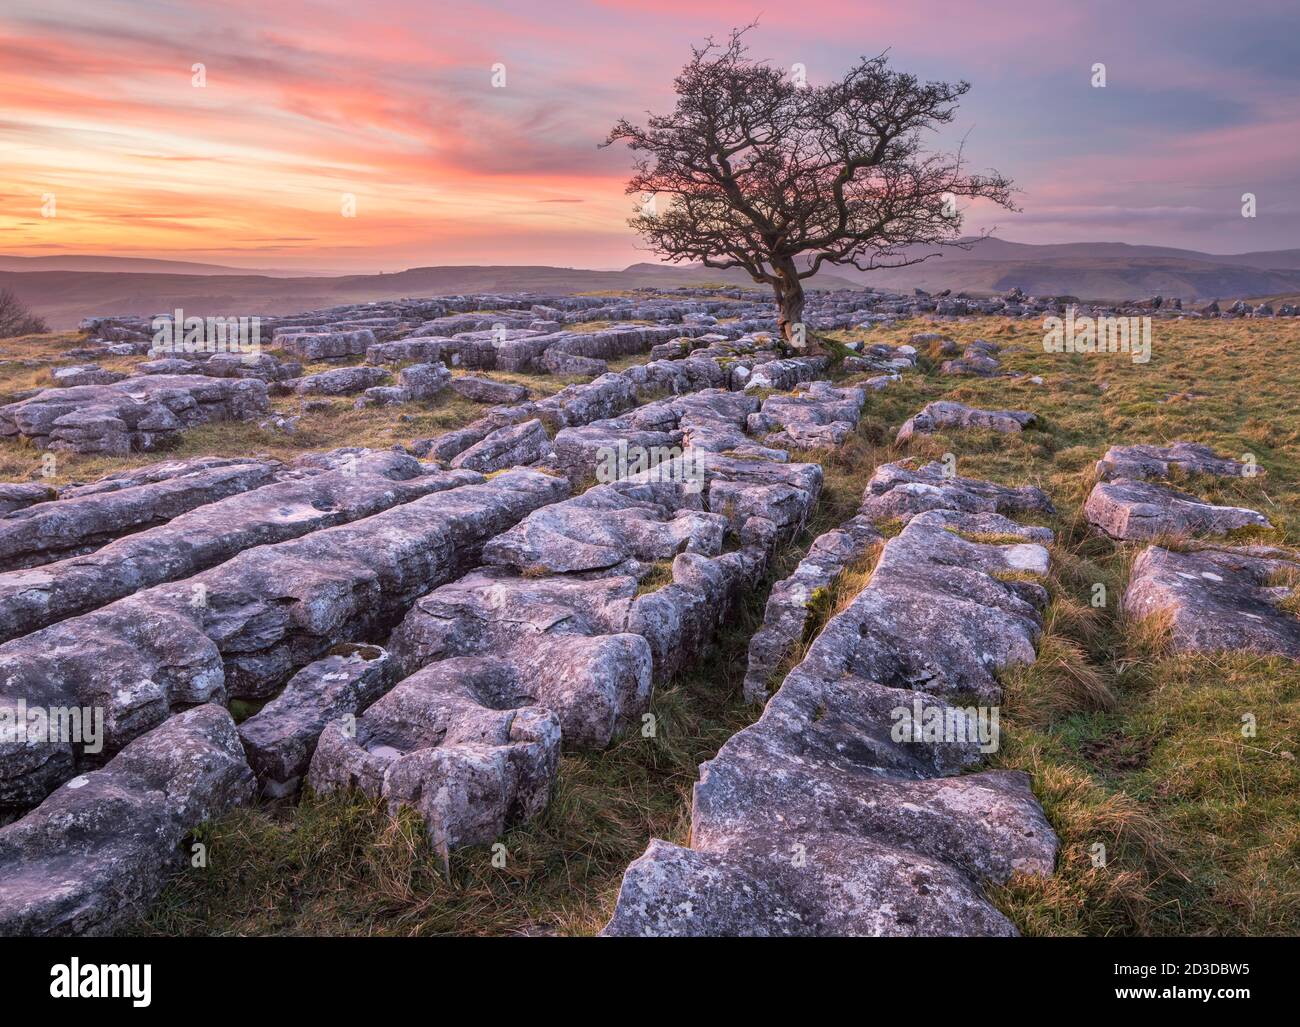 Hawthorn tree and Limestone pavement with views to Ingleborough Hill from Winskill Stones Nature Reserve above the village of Langcliffe near Settle, Stock Photo